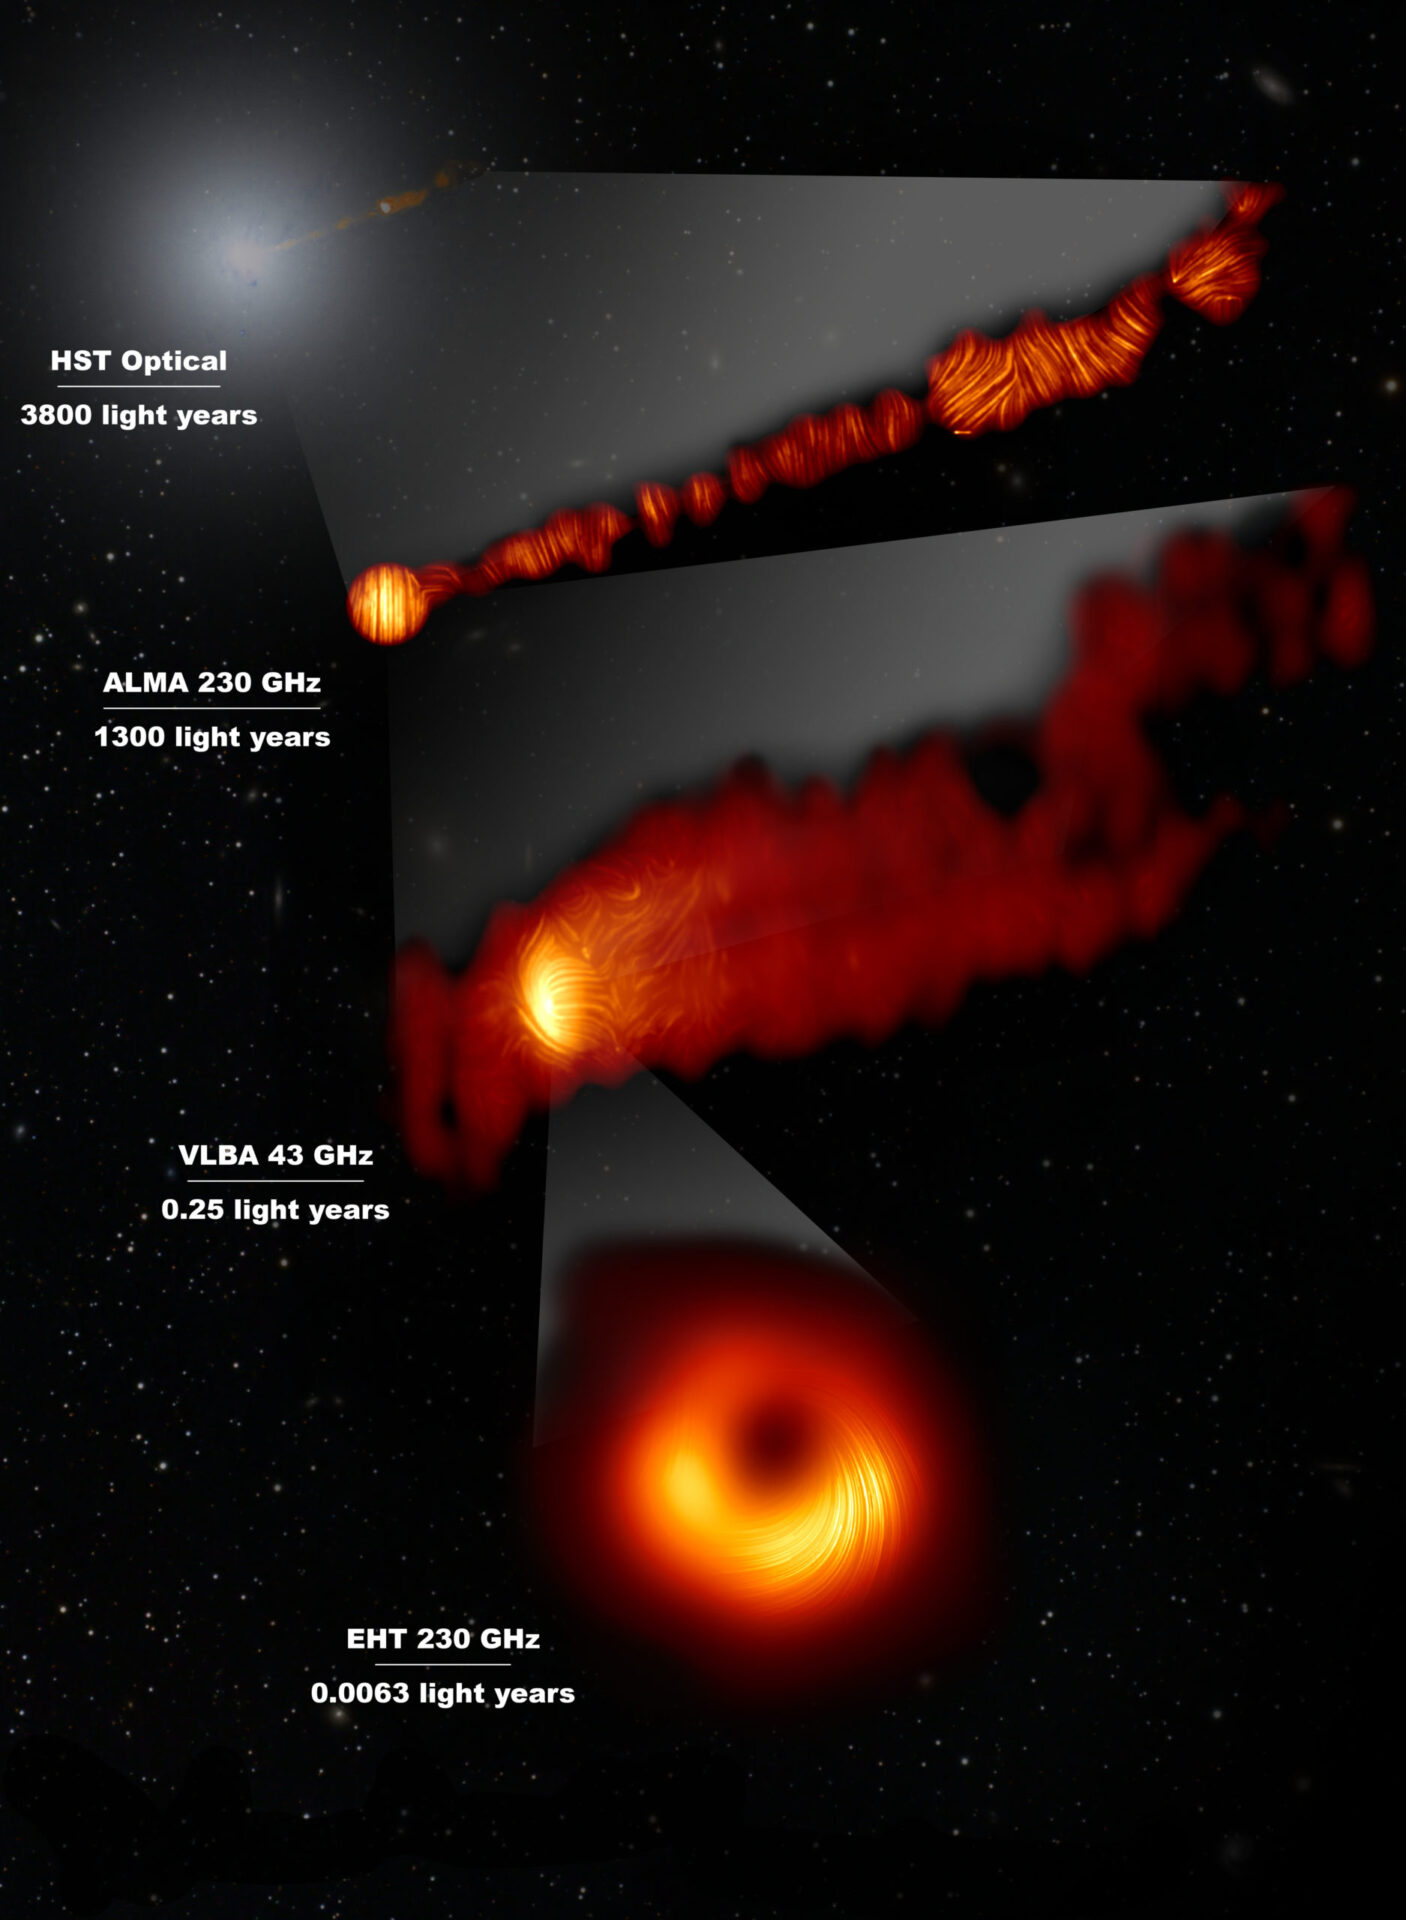 This composite image shows three views of the central region of the Messier 87 (M87) galaxy in polarised light and one view, in the visible wavelength, taken with the Hubble Space Telescope. The galaxy has a supermassive black hole at its centre and is famous for its jets, that extend far beyond the galaxy. The Hubble image at the top captures a part of the jet some 6000 light years in size. One of the polarised-light images, obtained with the Chile-based Atacama Large Millimeter/submillimeter Array (ALMA), in which ESO is a partner, shows part of the jet in polarised light. This image captures the part of the jet, with a size of 6000 light years, closer to the centre of the galaxy. The other polarised light images zoom in closer to the supermassive black hole: the middle view covers a region about one light year in size and was obtained with the National Radio Astronomy Observatory’s Very Long Baseline Array (VLBA) in the US. The most zoomed-in view was obtained by linking eight telescopes around the world to create a virtual Earth-sized telescope, the Event Horizon Telescope or EHT. This allows astronomers to see very close to the supermassive black hole, into the region where the jets are launched. The lines mark the orientation of polarisation, which is related to the magnetic field in the regions imaged. The ALMA data provides a description of the magnetic field structure along the jet. Therefore the combined information from the EHT and ALMA allows astronomers to investigate the role of magnetic fields from the vicinity of the event horizon (as probed with the EHT on light-day scales) to far beyond the M87 galaxy along its powerful jets (as probed with ALMA on scales of thousand of light-years). The values in GHz refer to the frequencies of light at which the different observations were made. The horizontal lines show the scale (in light years) of each of the individual images. Credit: EHT Collaboration; ALMA (ESO/NAOJ/NRAO), Goddi et al.; NASA, ESA and the Hubble Heritage Team (STScI/AURA); VLBA (NRAO), Kravchenko et al.; J. C. Algaba, I. Martí-Vidal